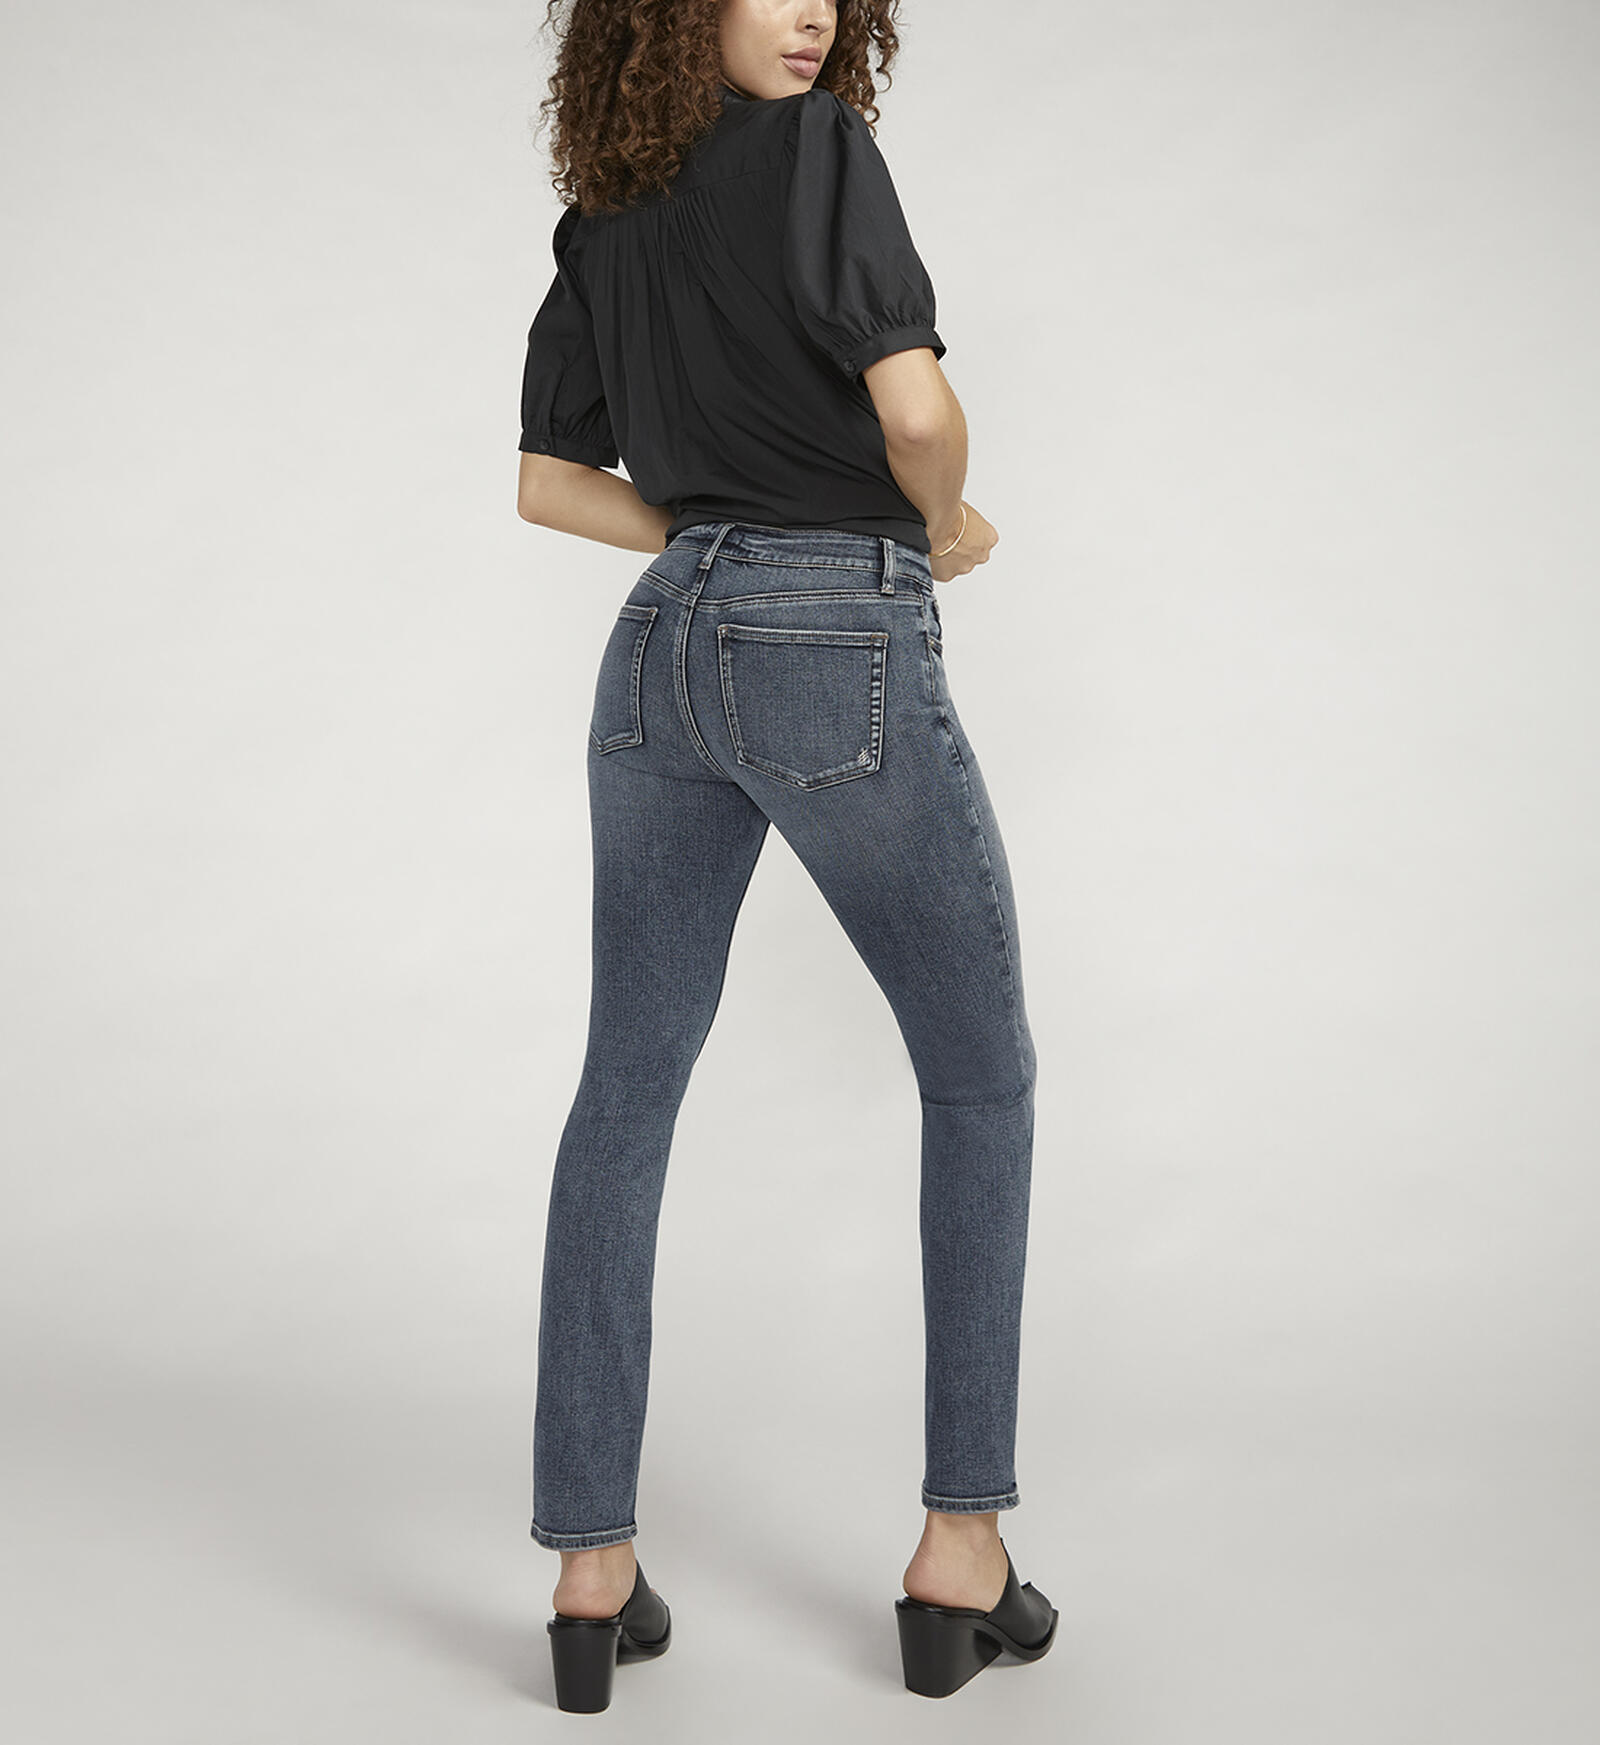 Silver Jeans Co. Most Wanted Mid Rise Straight Leg Jeans - 20873216